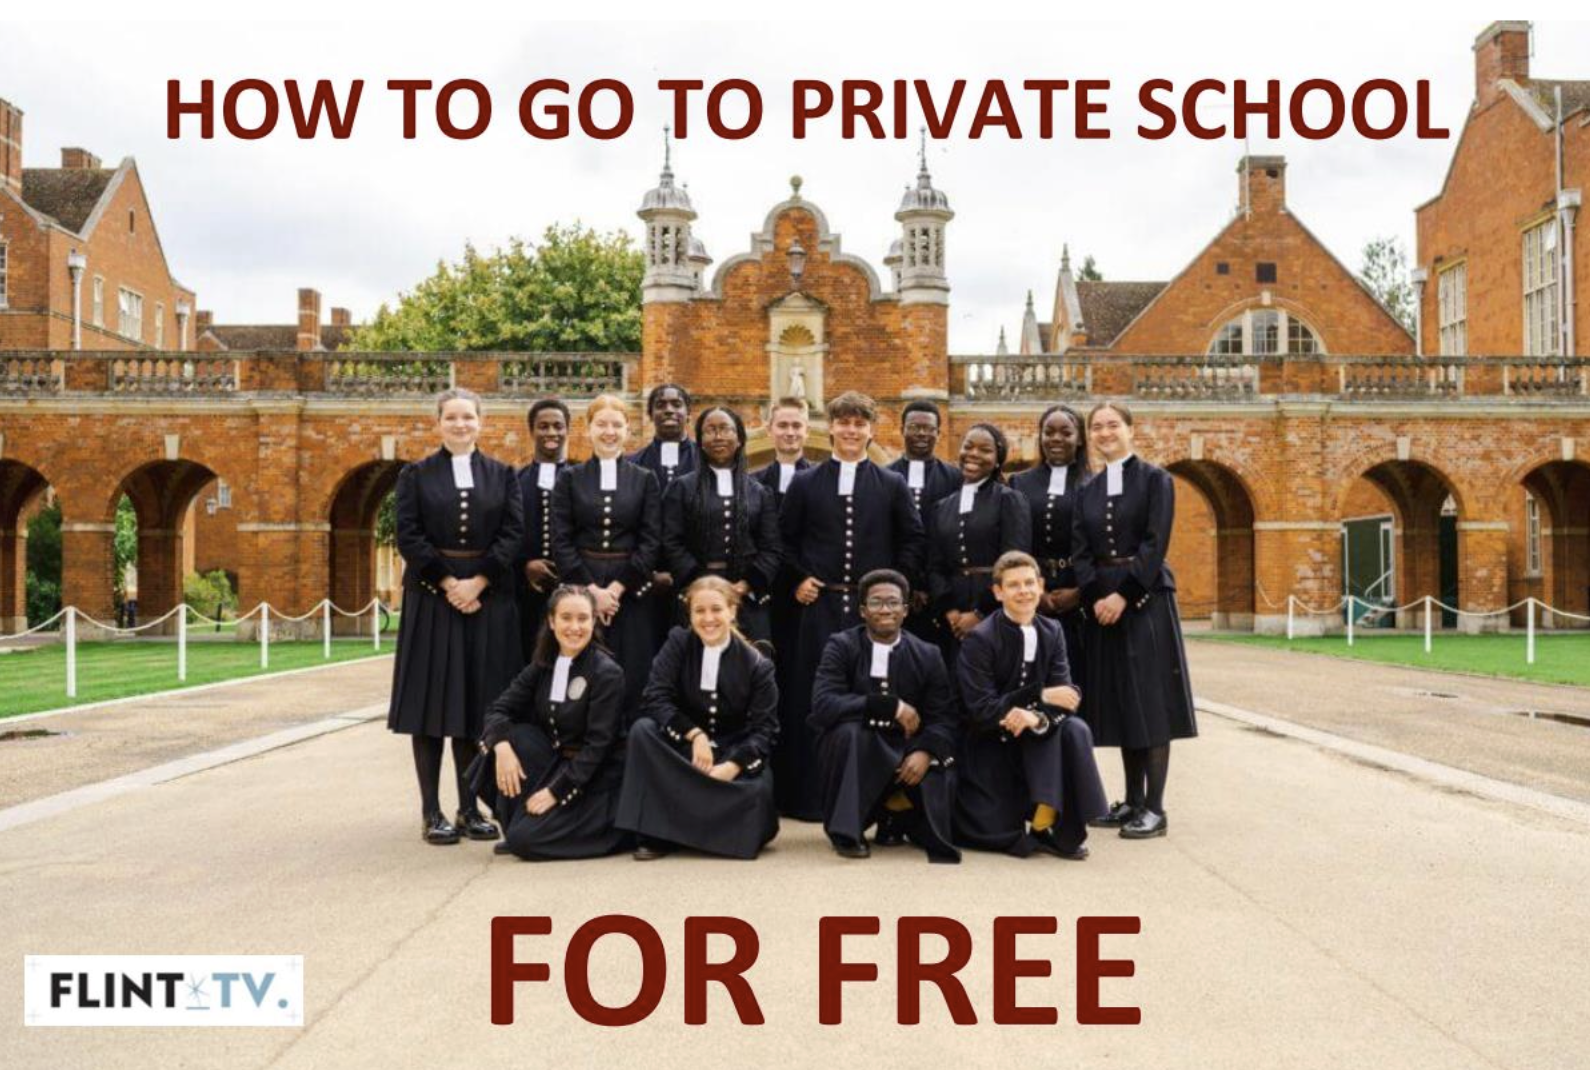 How to Go to Private School for Free